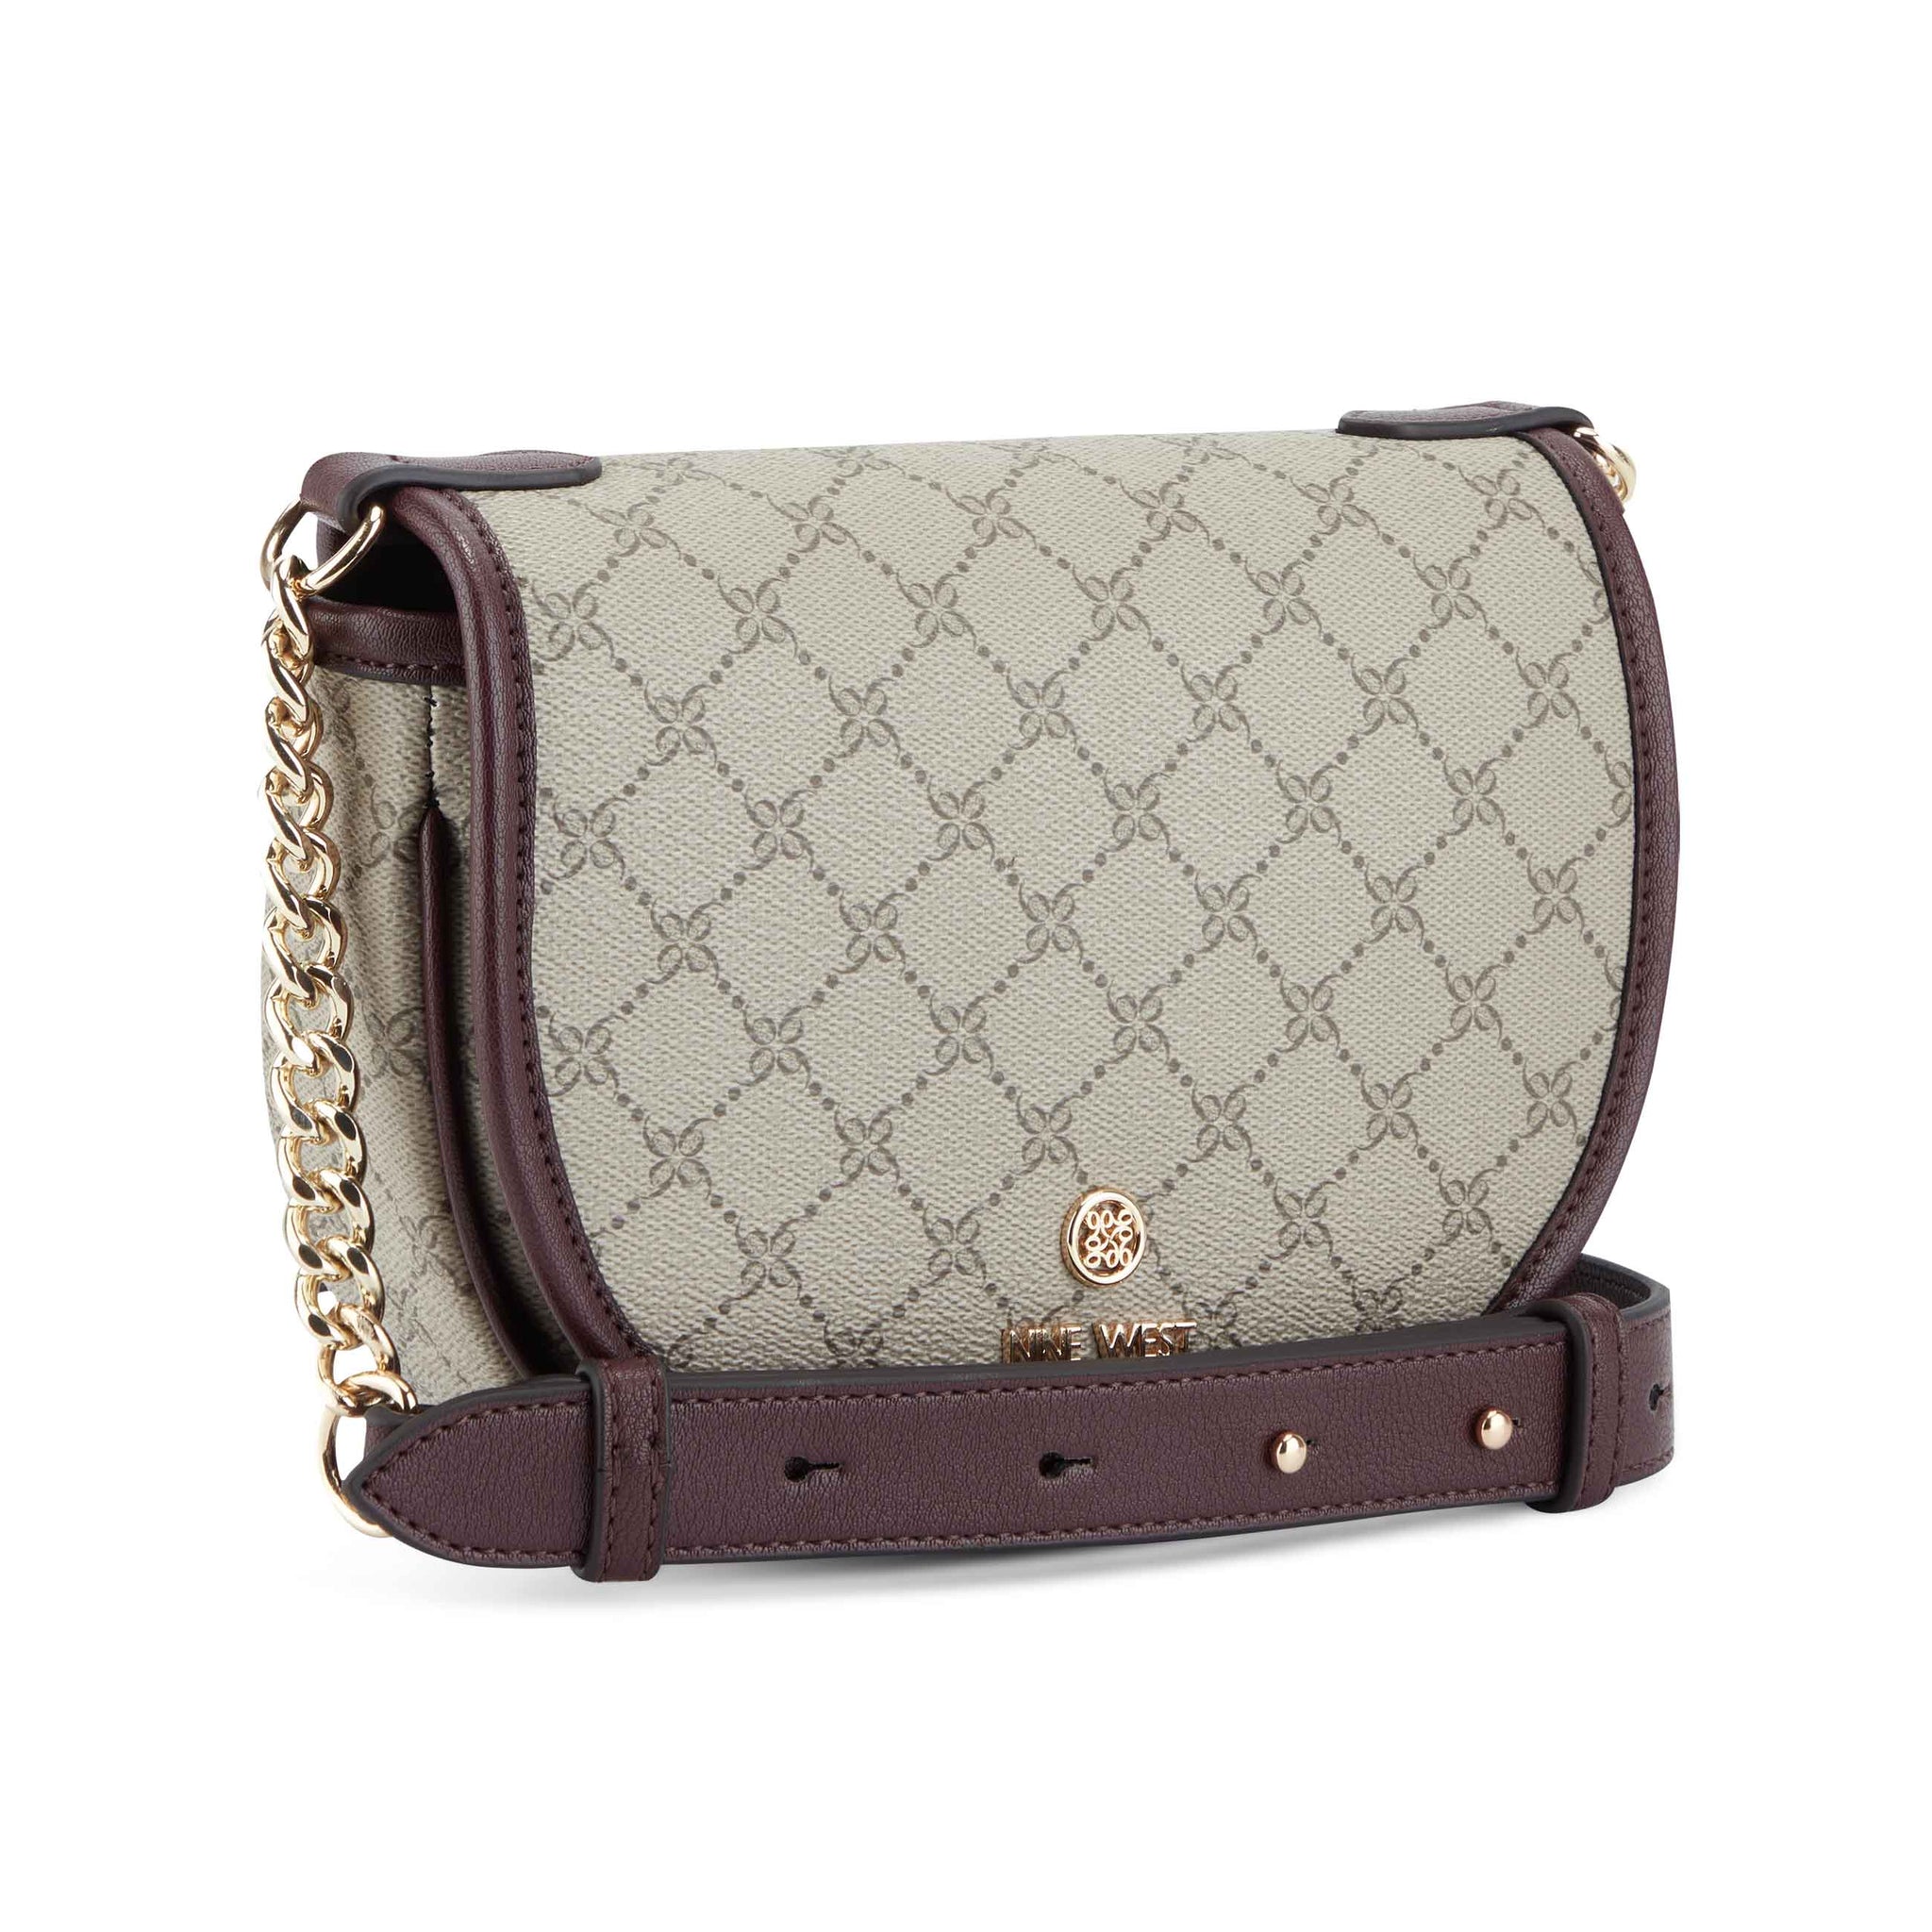 Gucci Ophidia GG small shoulder bag - ShopStyle